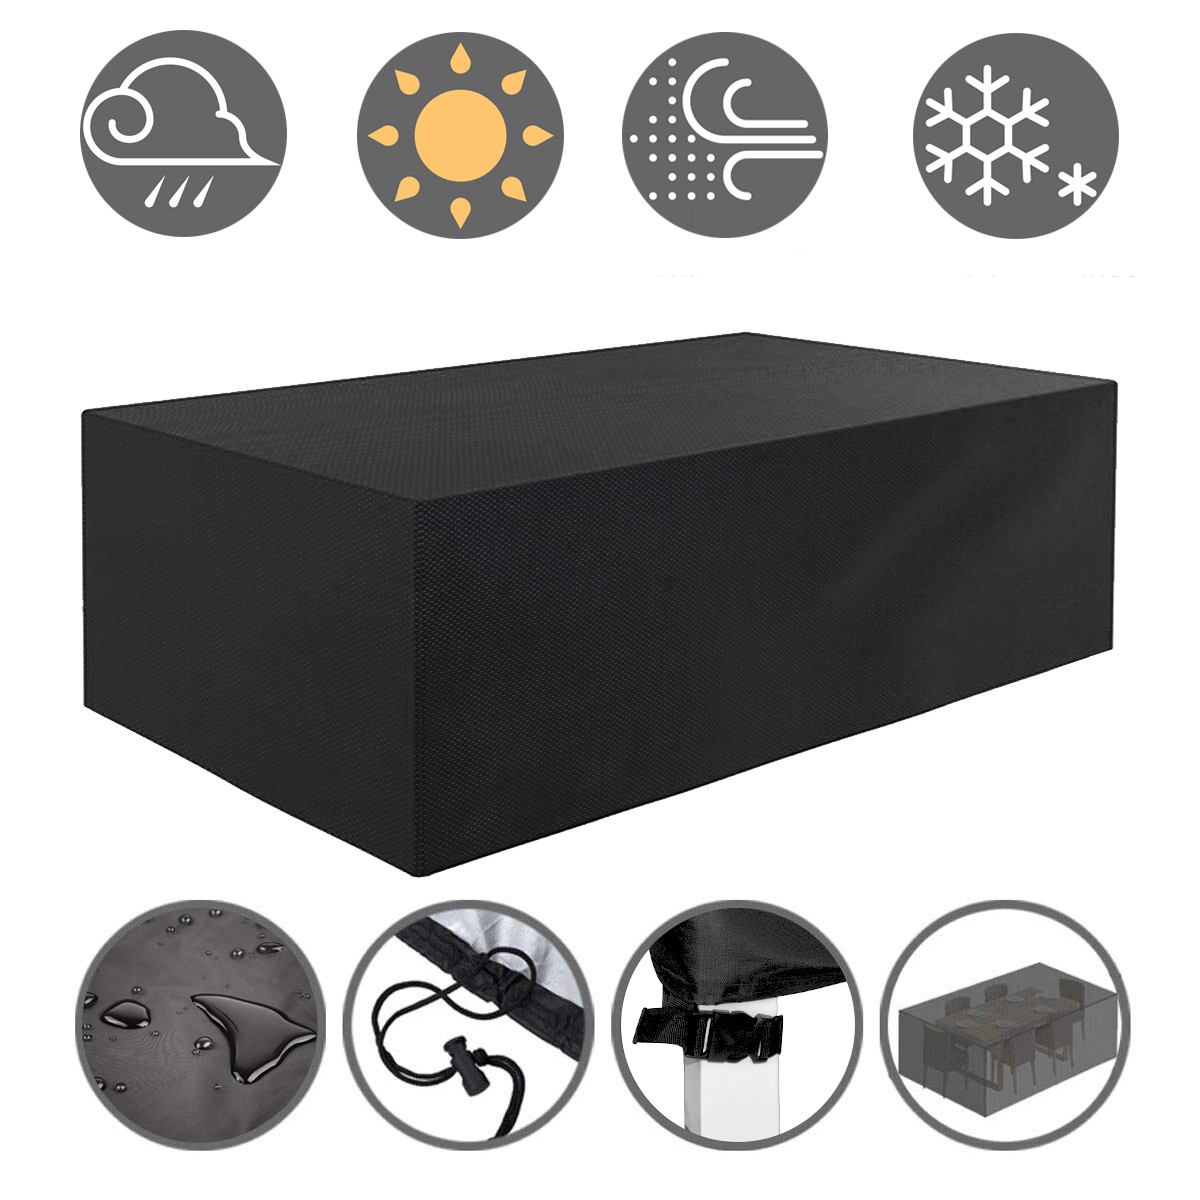 242x162x100cm-420D-Patio-Garden-Outdoor-Furniture-Set-Protector-Cover-Table-Chair-Waterproof-Cover-1665448-1